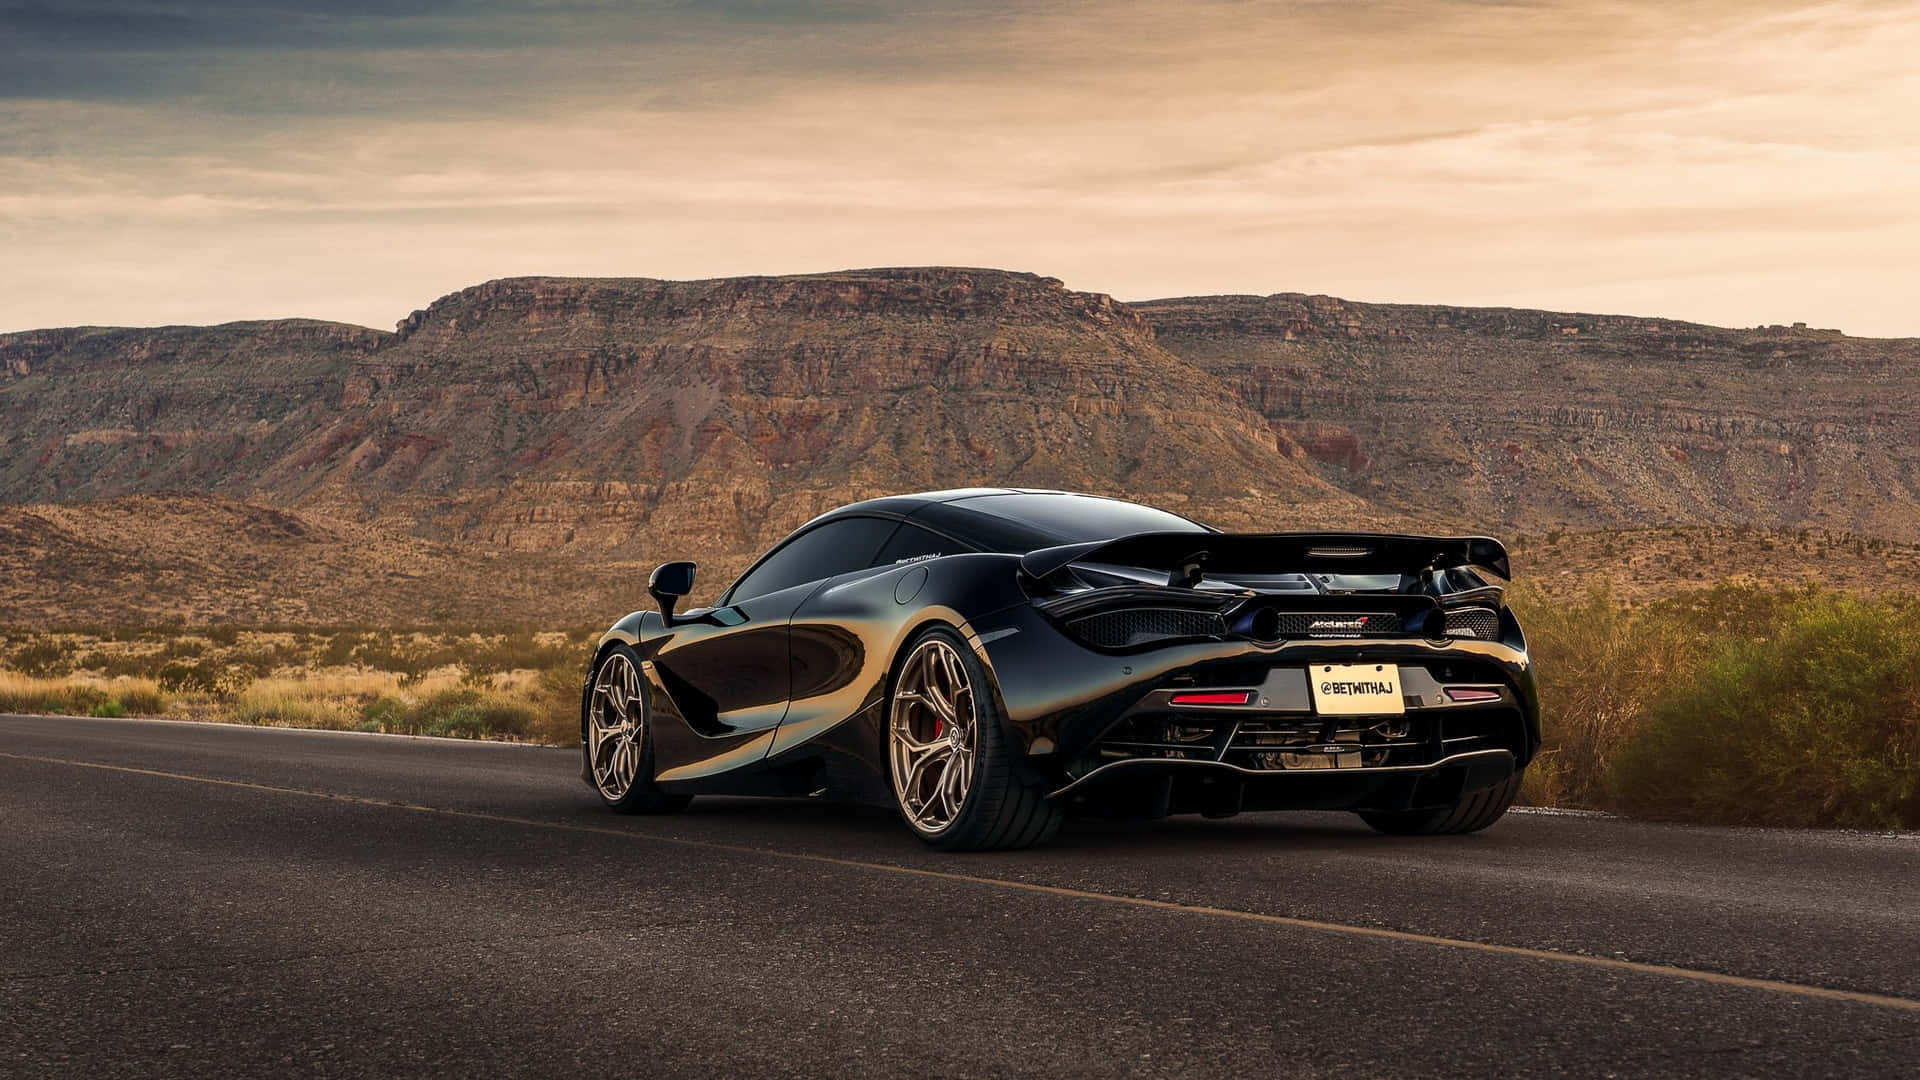 Feast Your Eyes On The Incredible and Distinctive Best McLaren 720s